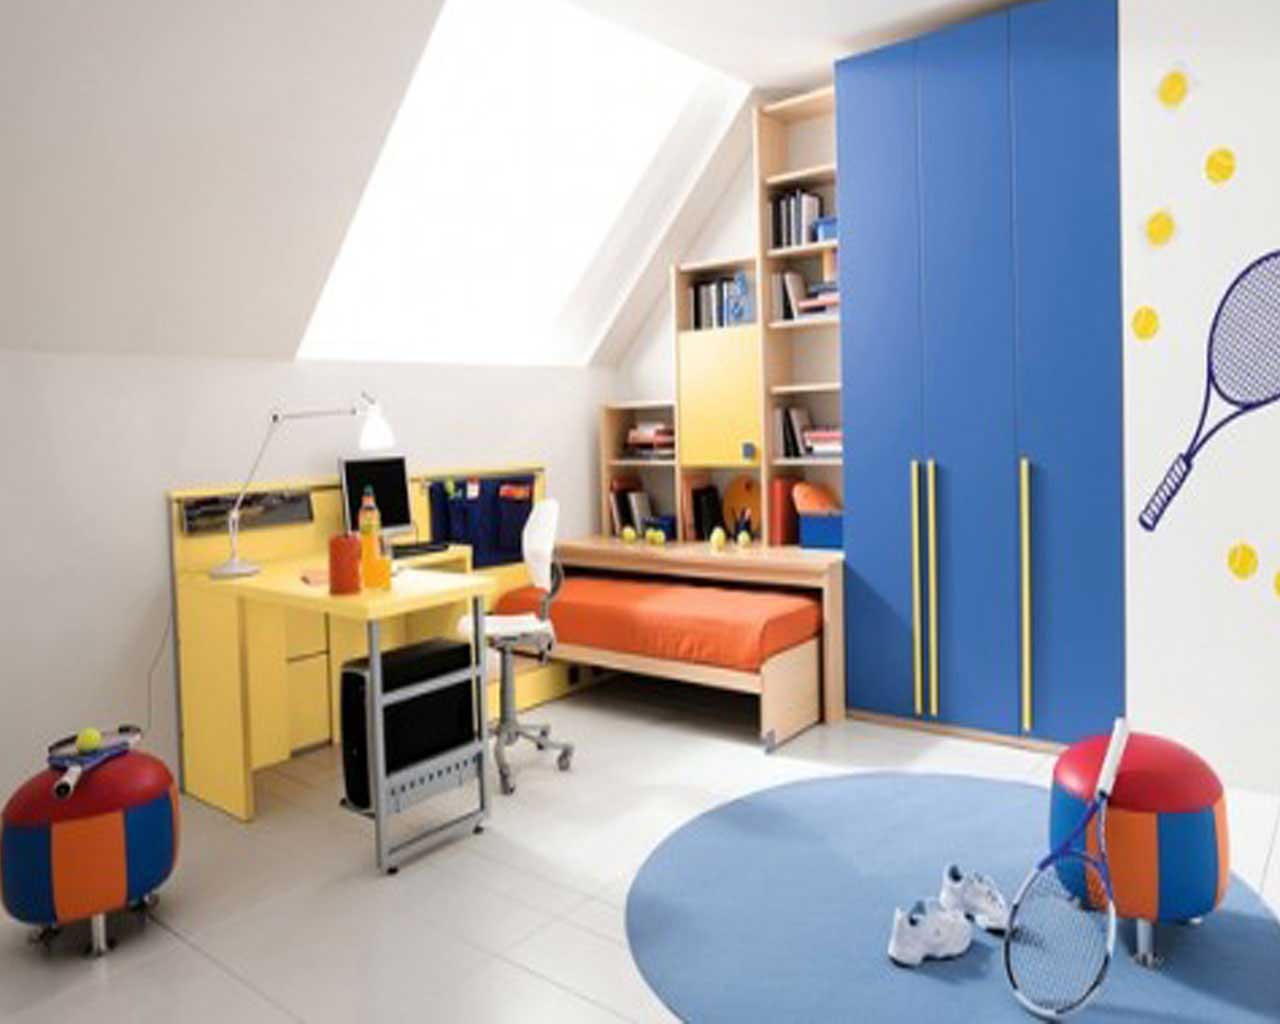 Boys And Decor Sports Boys And Kids Room Decor Design Ideas With Inspiring Laptop Study Table Designs And Modern Wall Shelves Design Ideas Plus Fresh Orange Bed Linen Color Schemes Ideas Decoration Kids Desire And Kids Room Decor